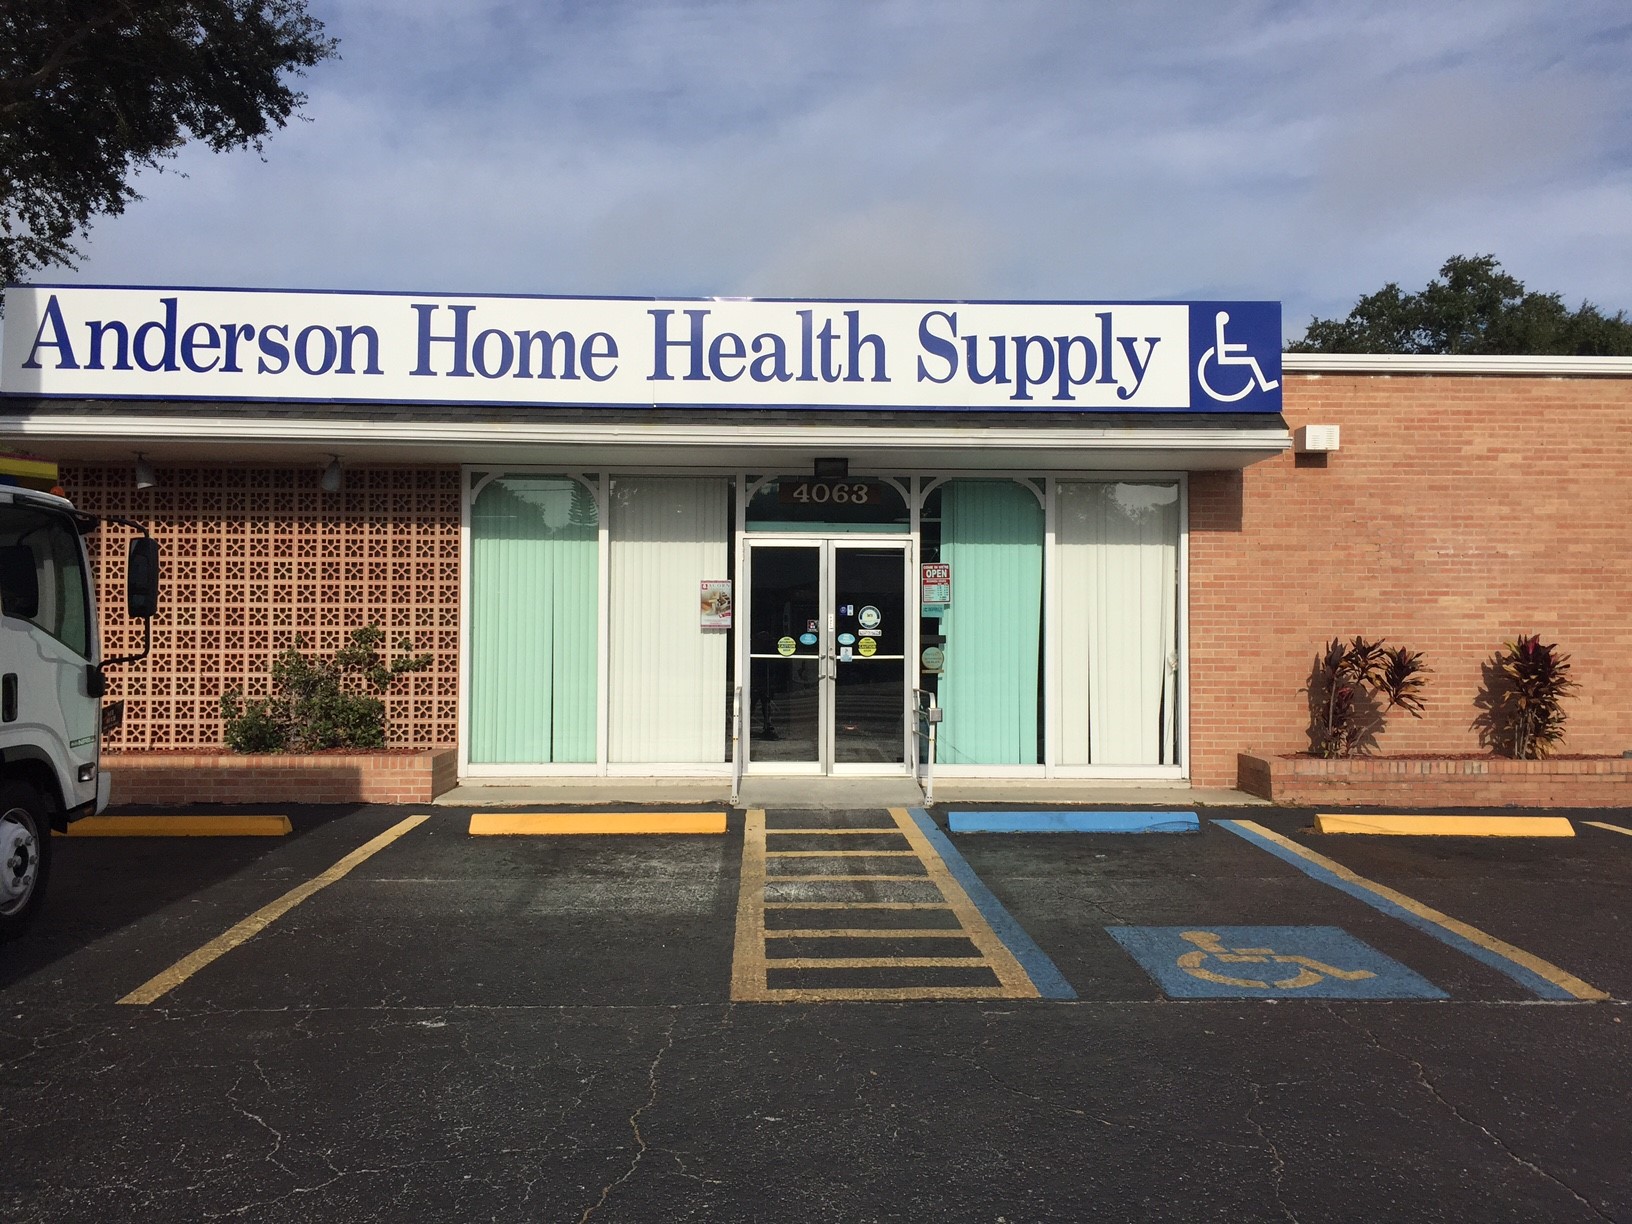 Anderson Home Health Supply